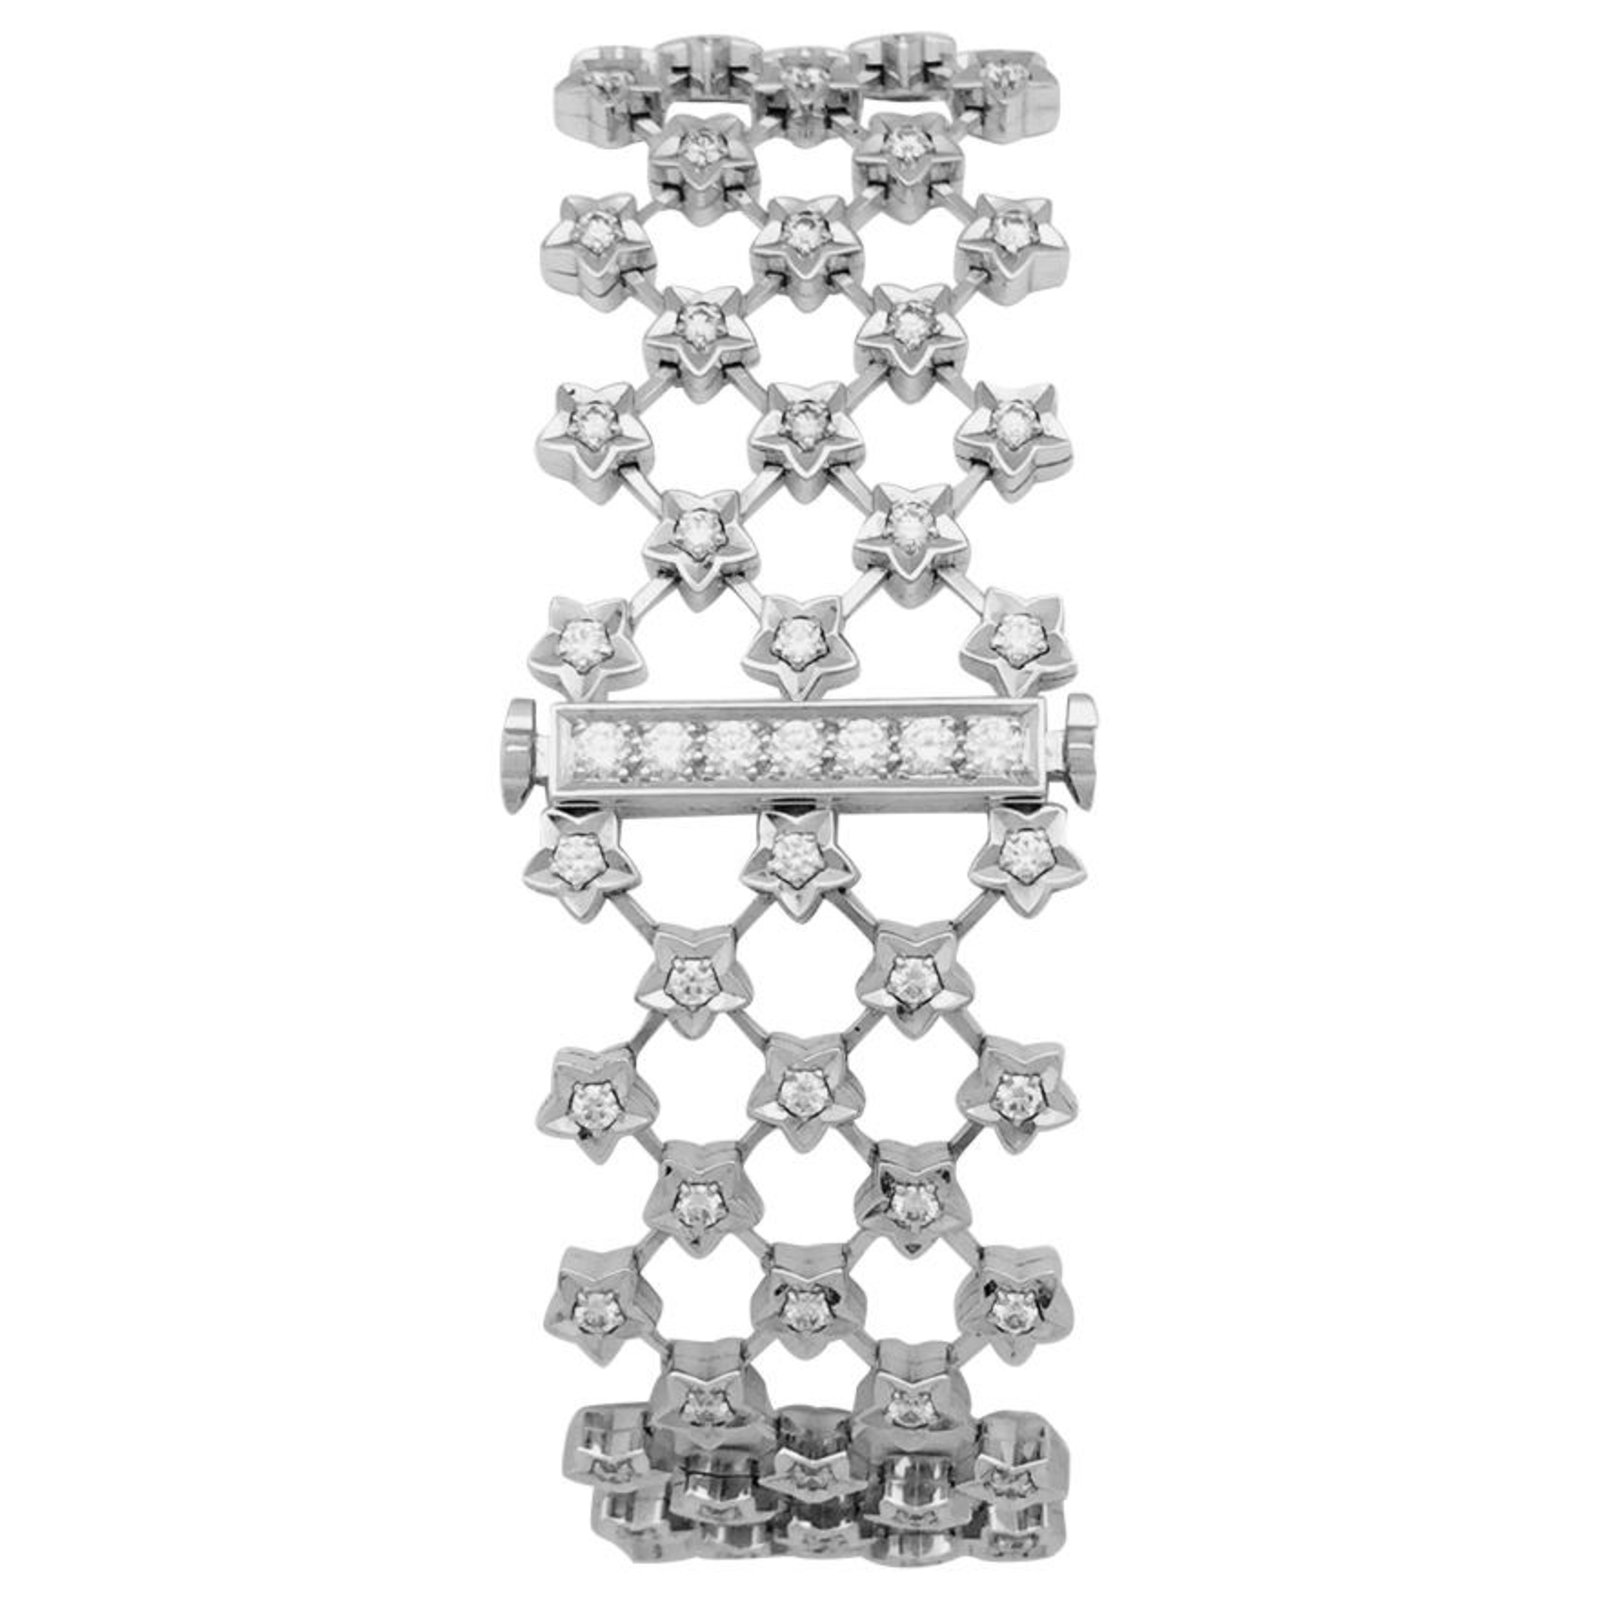 Chanel jewelery watch model Star dust in white gold and diamonds.